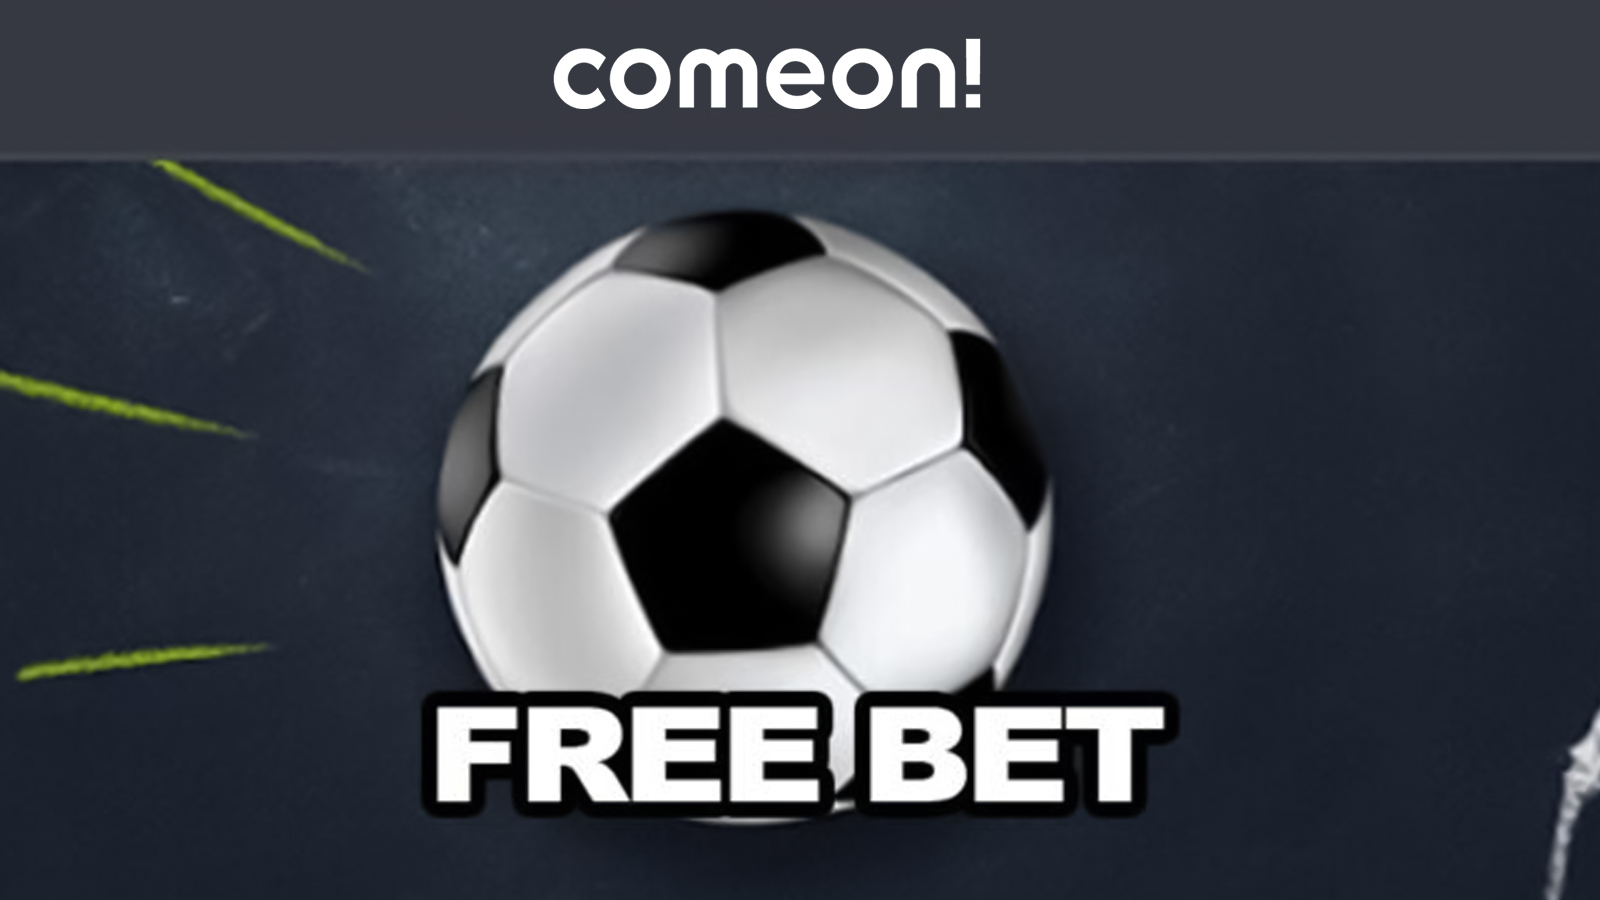 Use your free bets on betting on cricket at Comeon Casino.